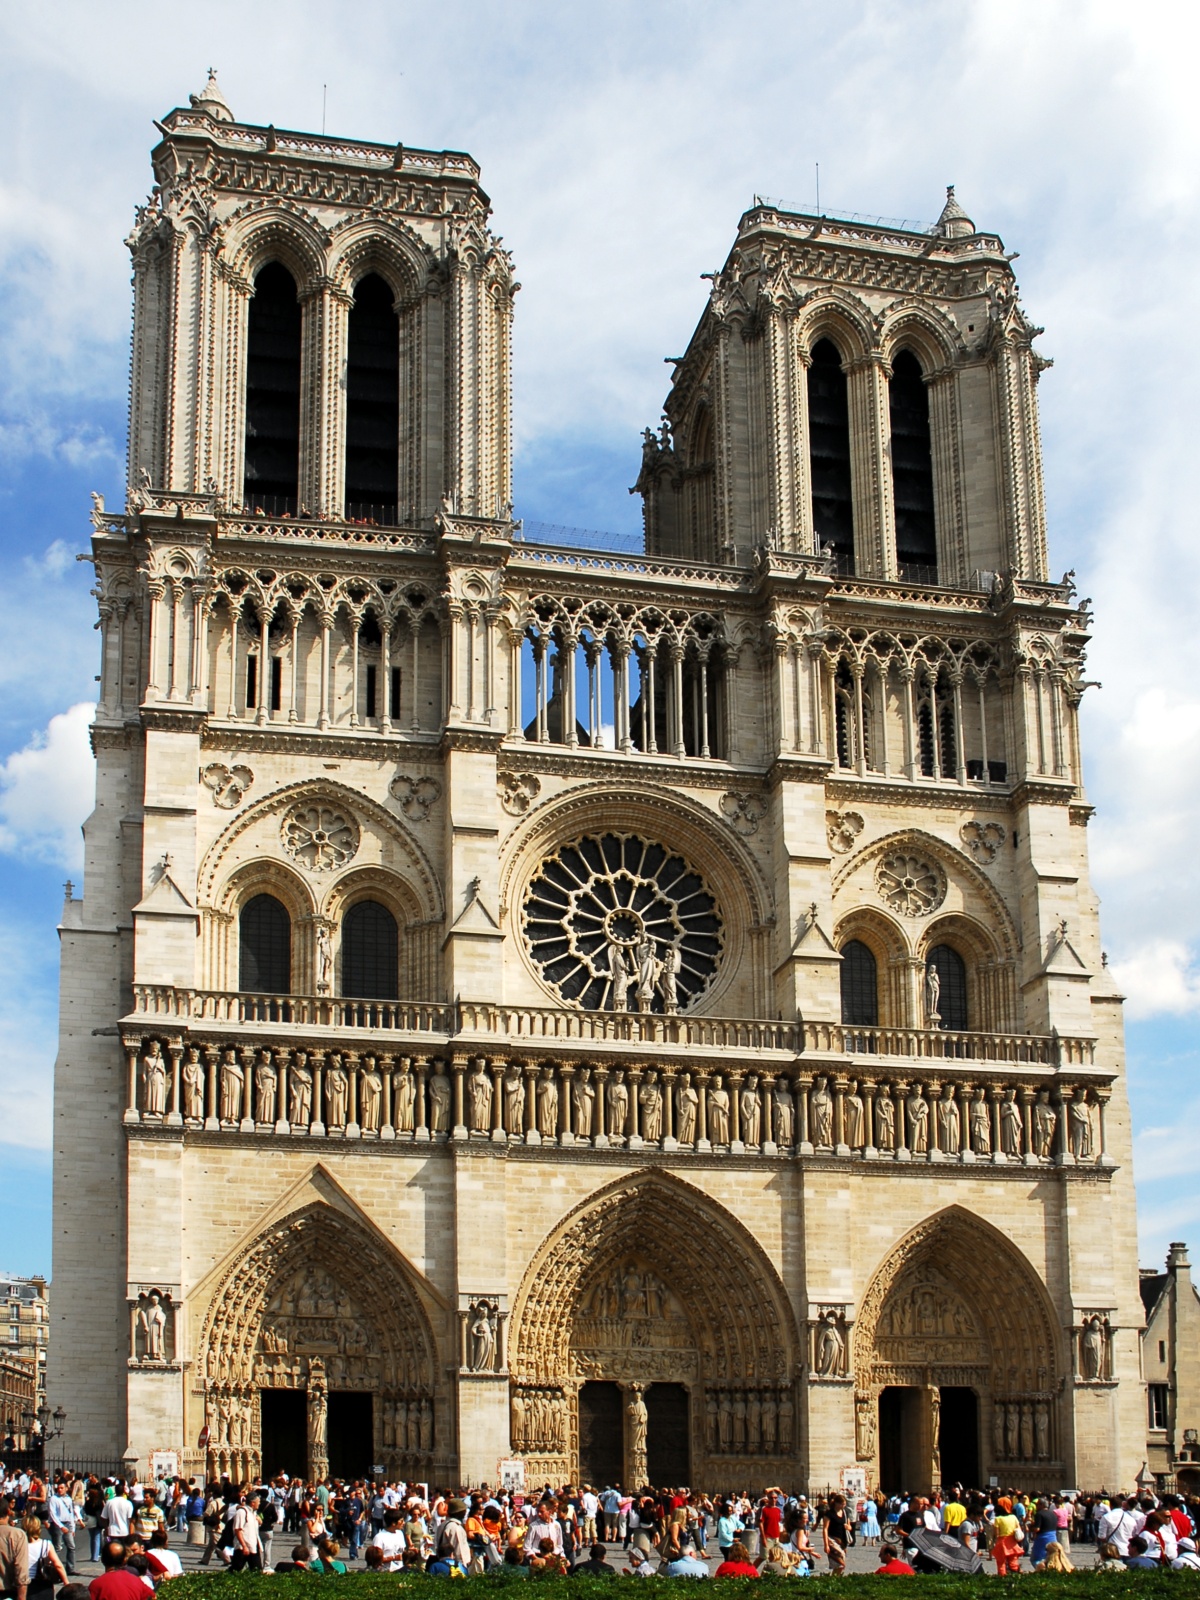 Entrance of the Notre Dame Cathedral in Paris